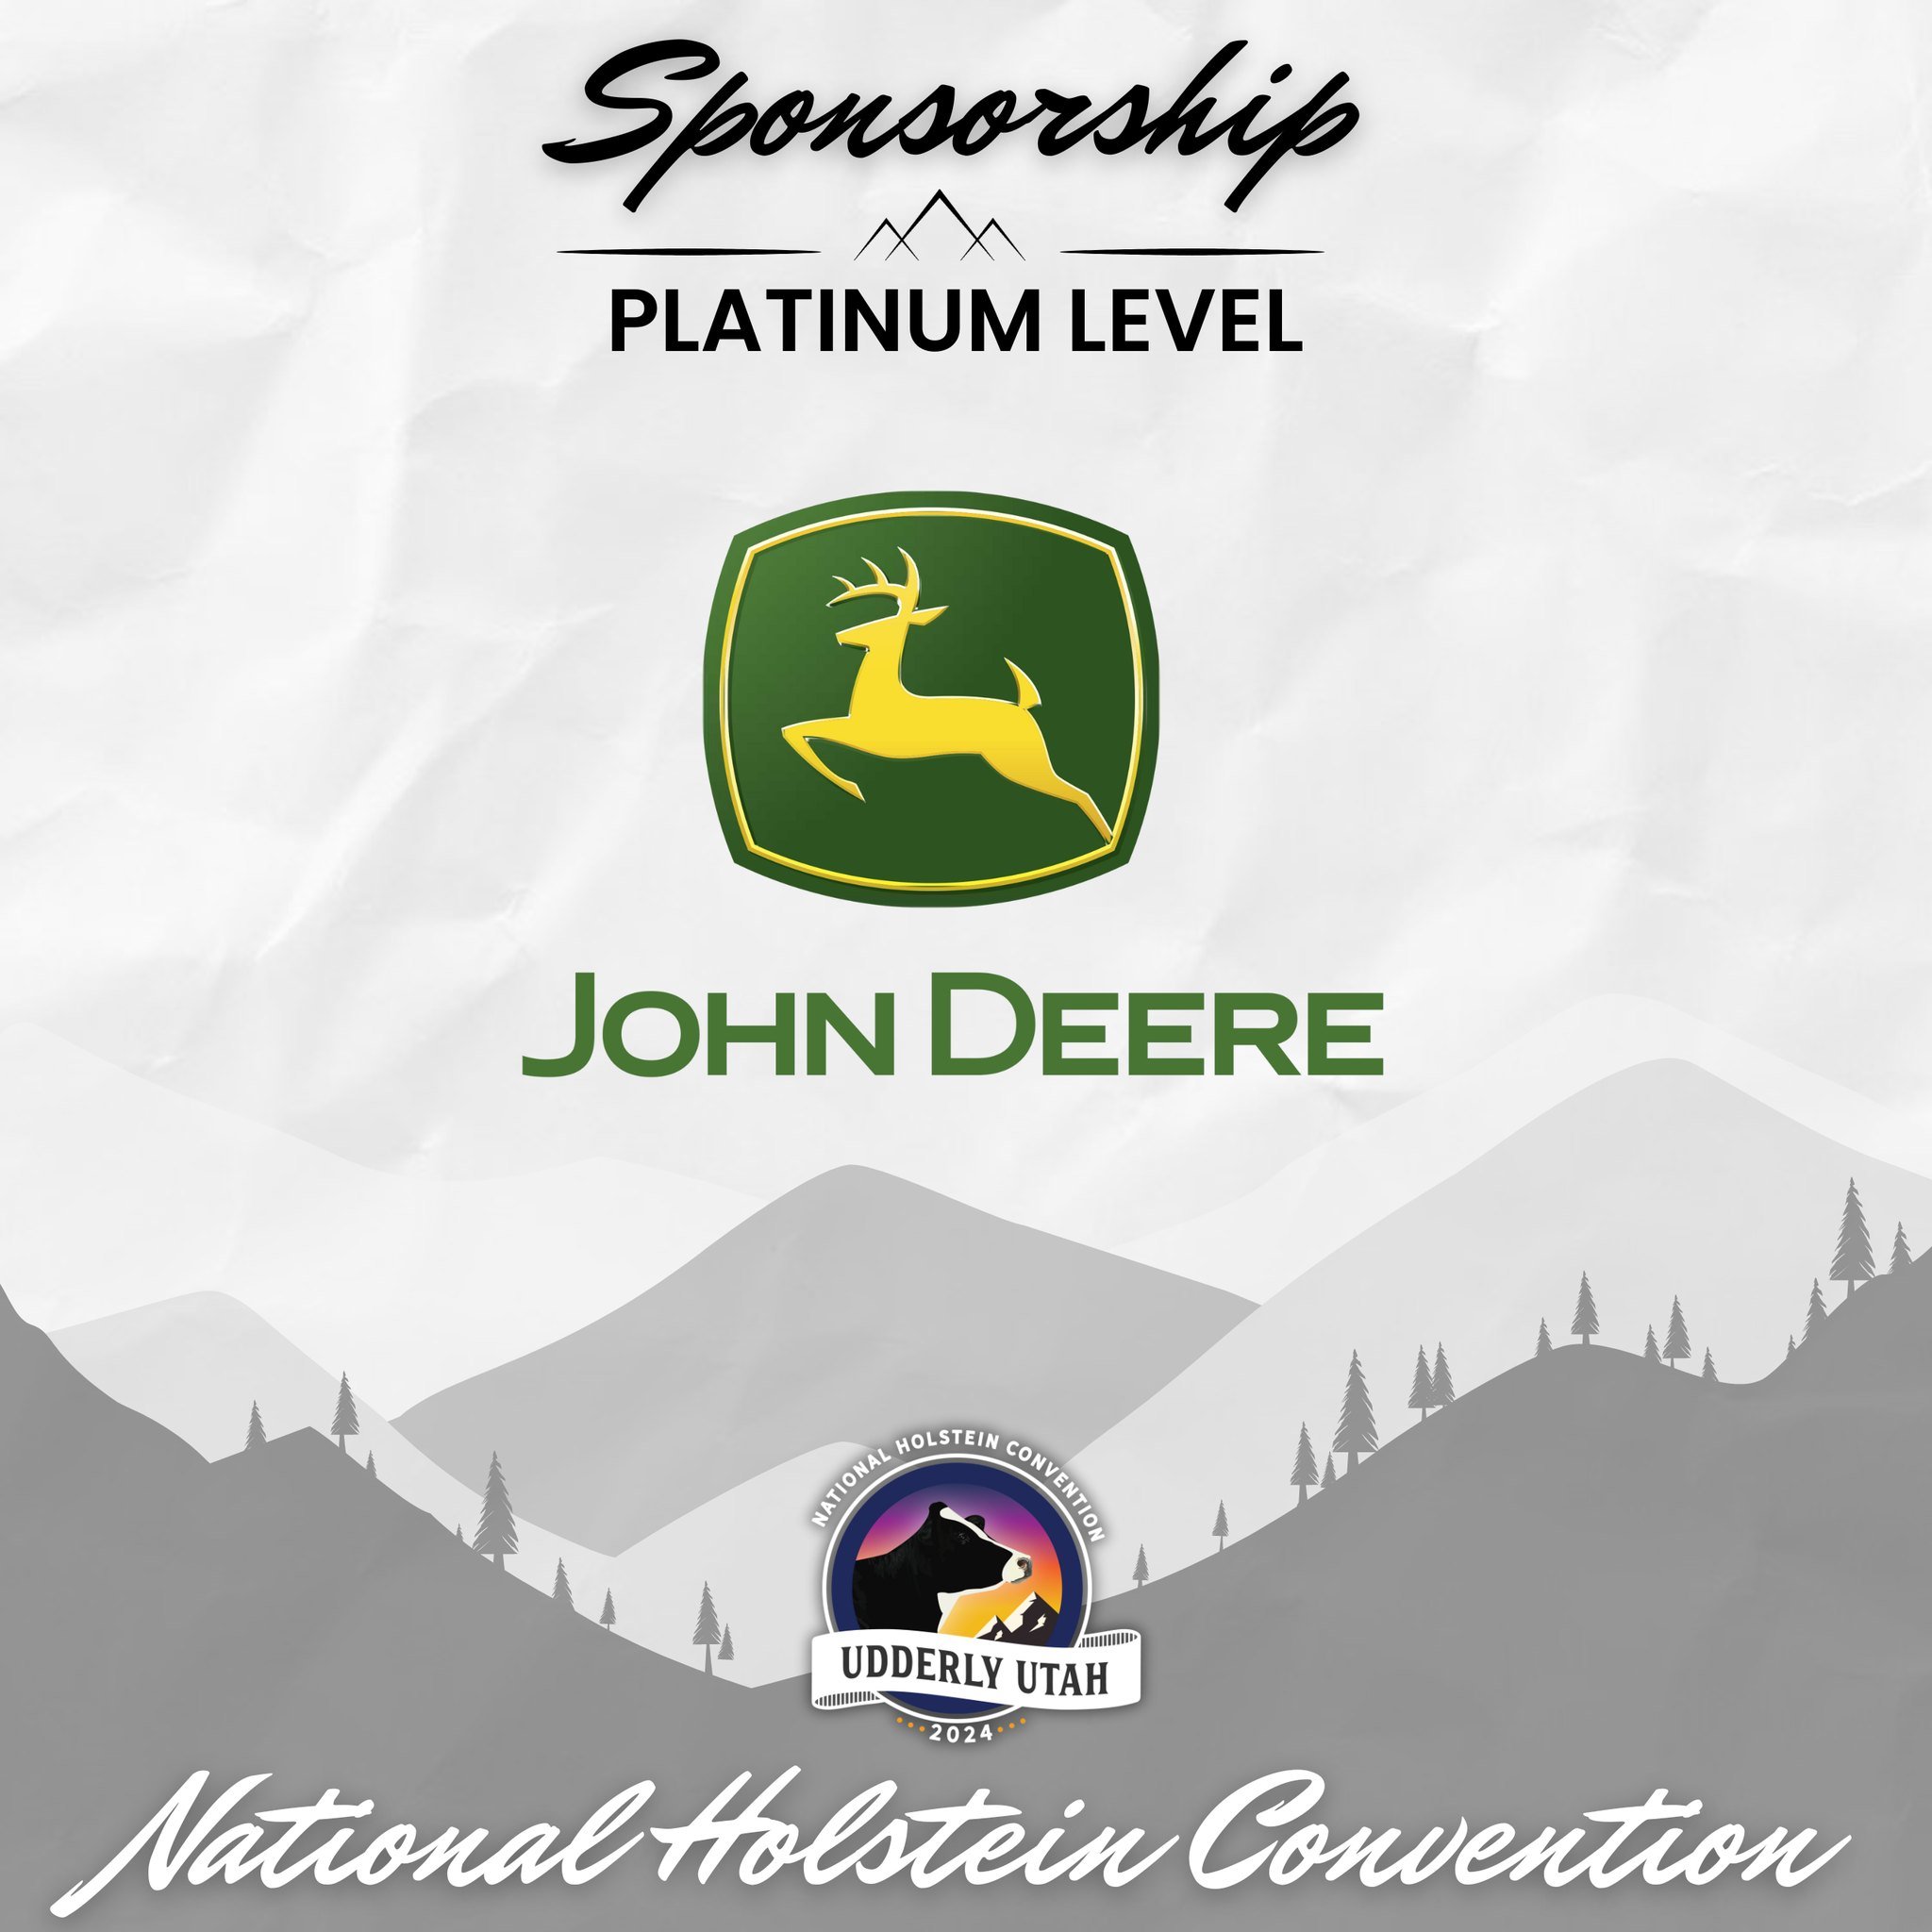 As we gear up for the 2024 National Holstein Convention, we're thrilled to spotlight our amazing sponsors! 🐄⛰️

Shoutout to @johndeere for stepping up as a platinum-level sponsor! Your support for the Holstein community is outstanding. 🚜✨

Click th